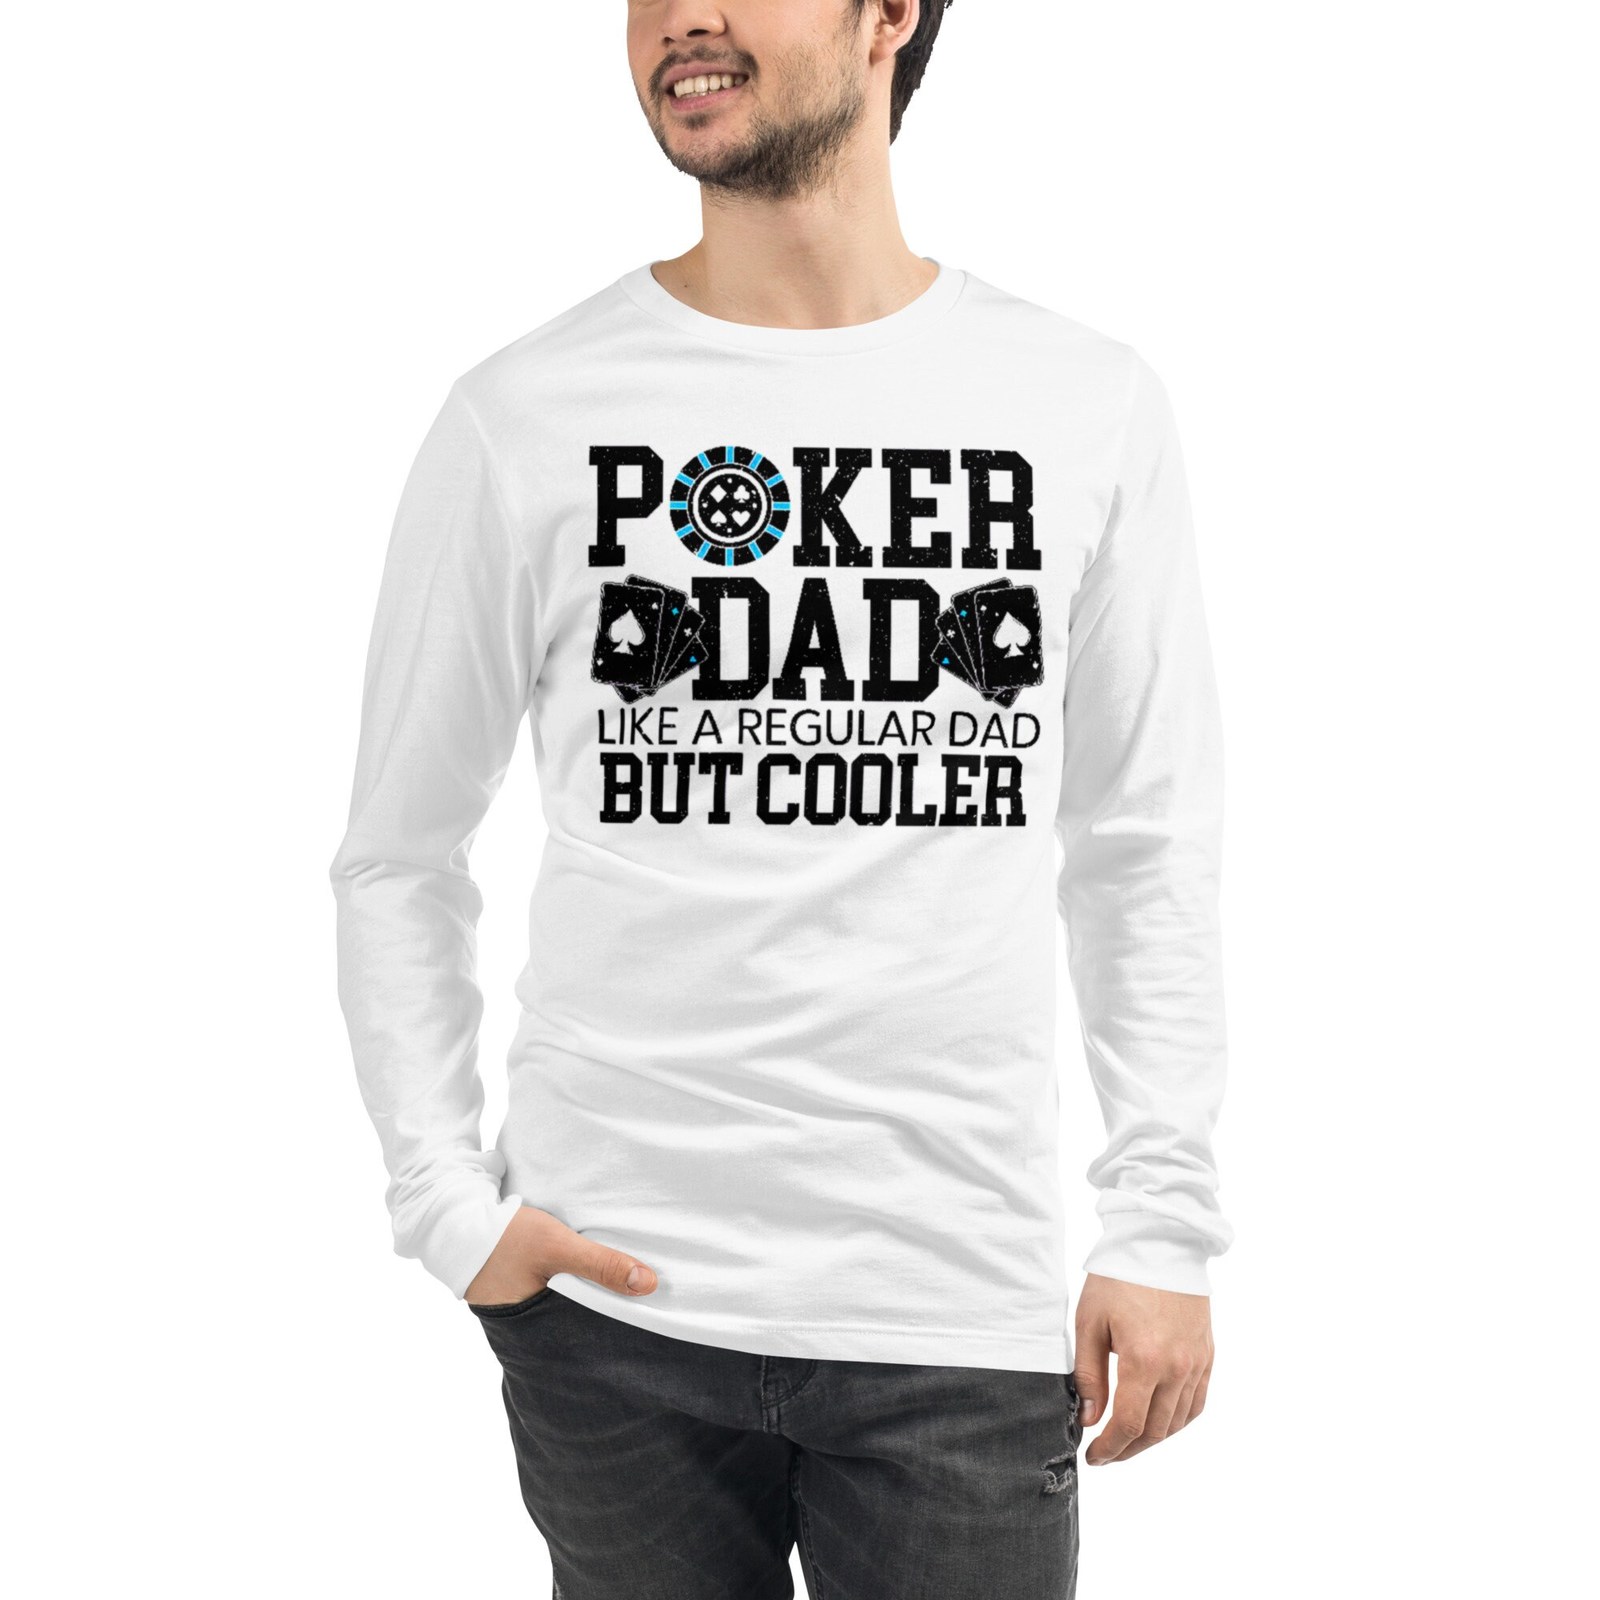 Primary image for POKER DAD Sweatshirt | Funny Meme Father's Day Poker Gift Shirt 